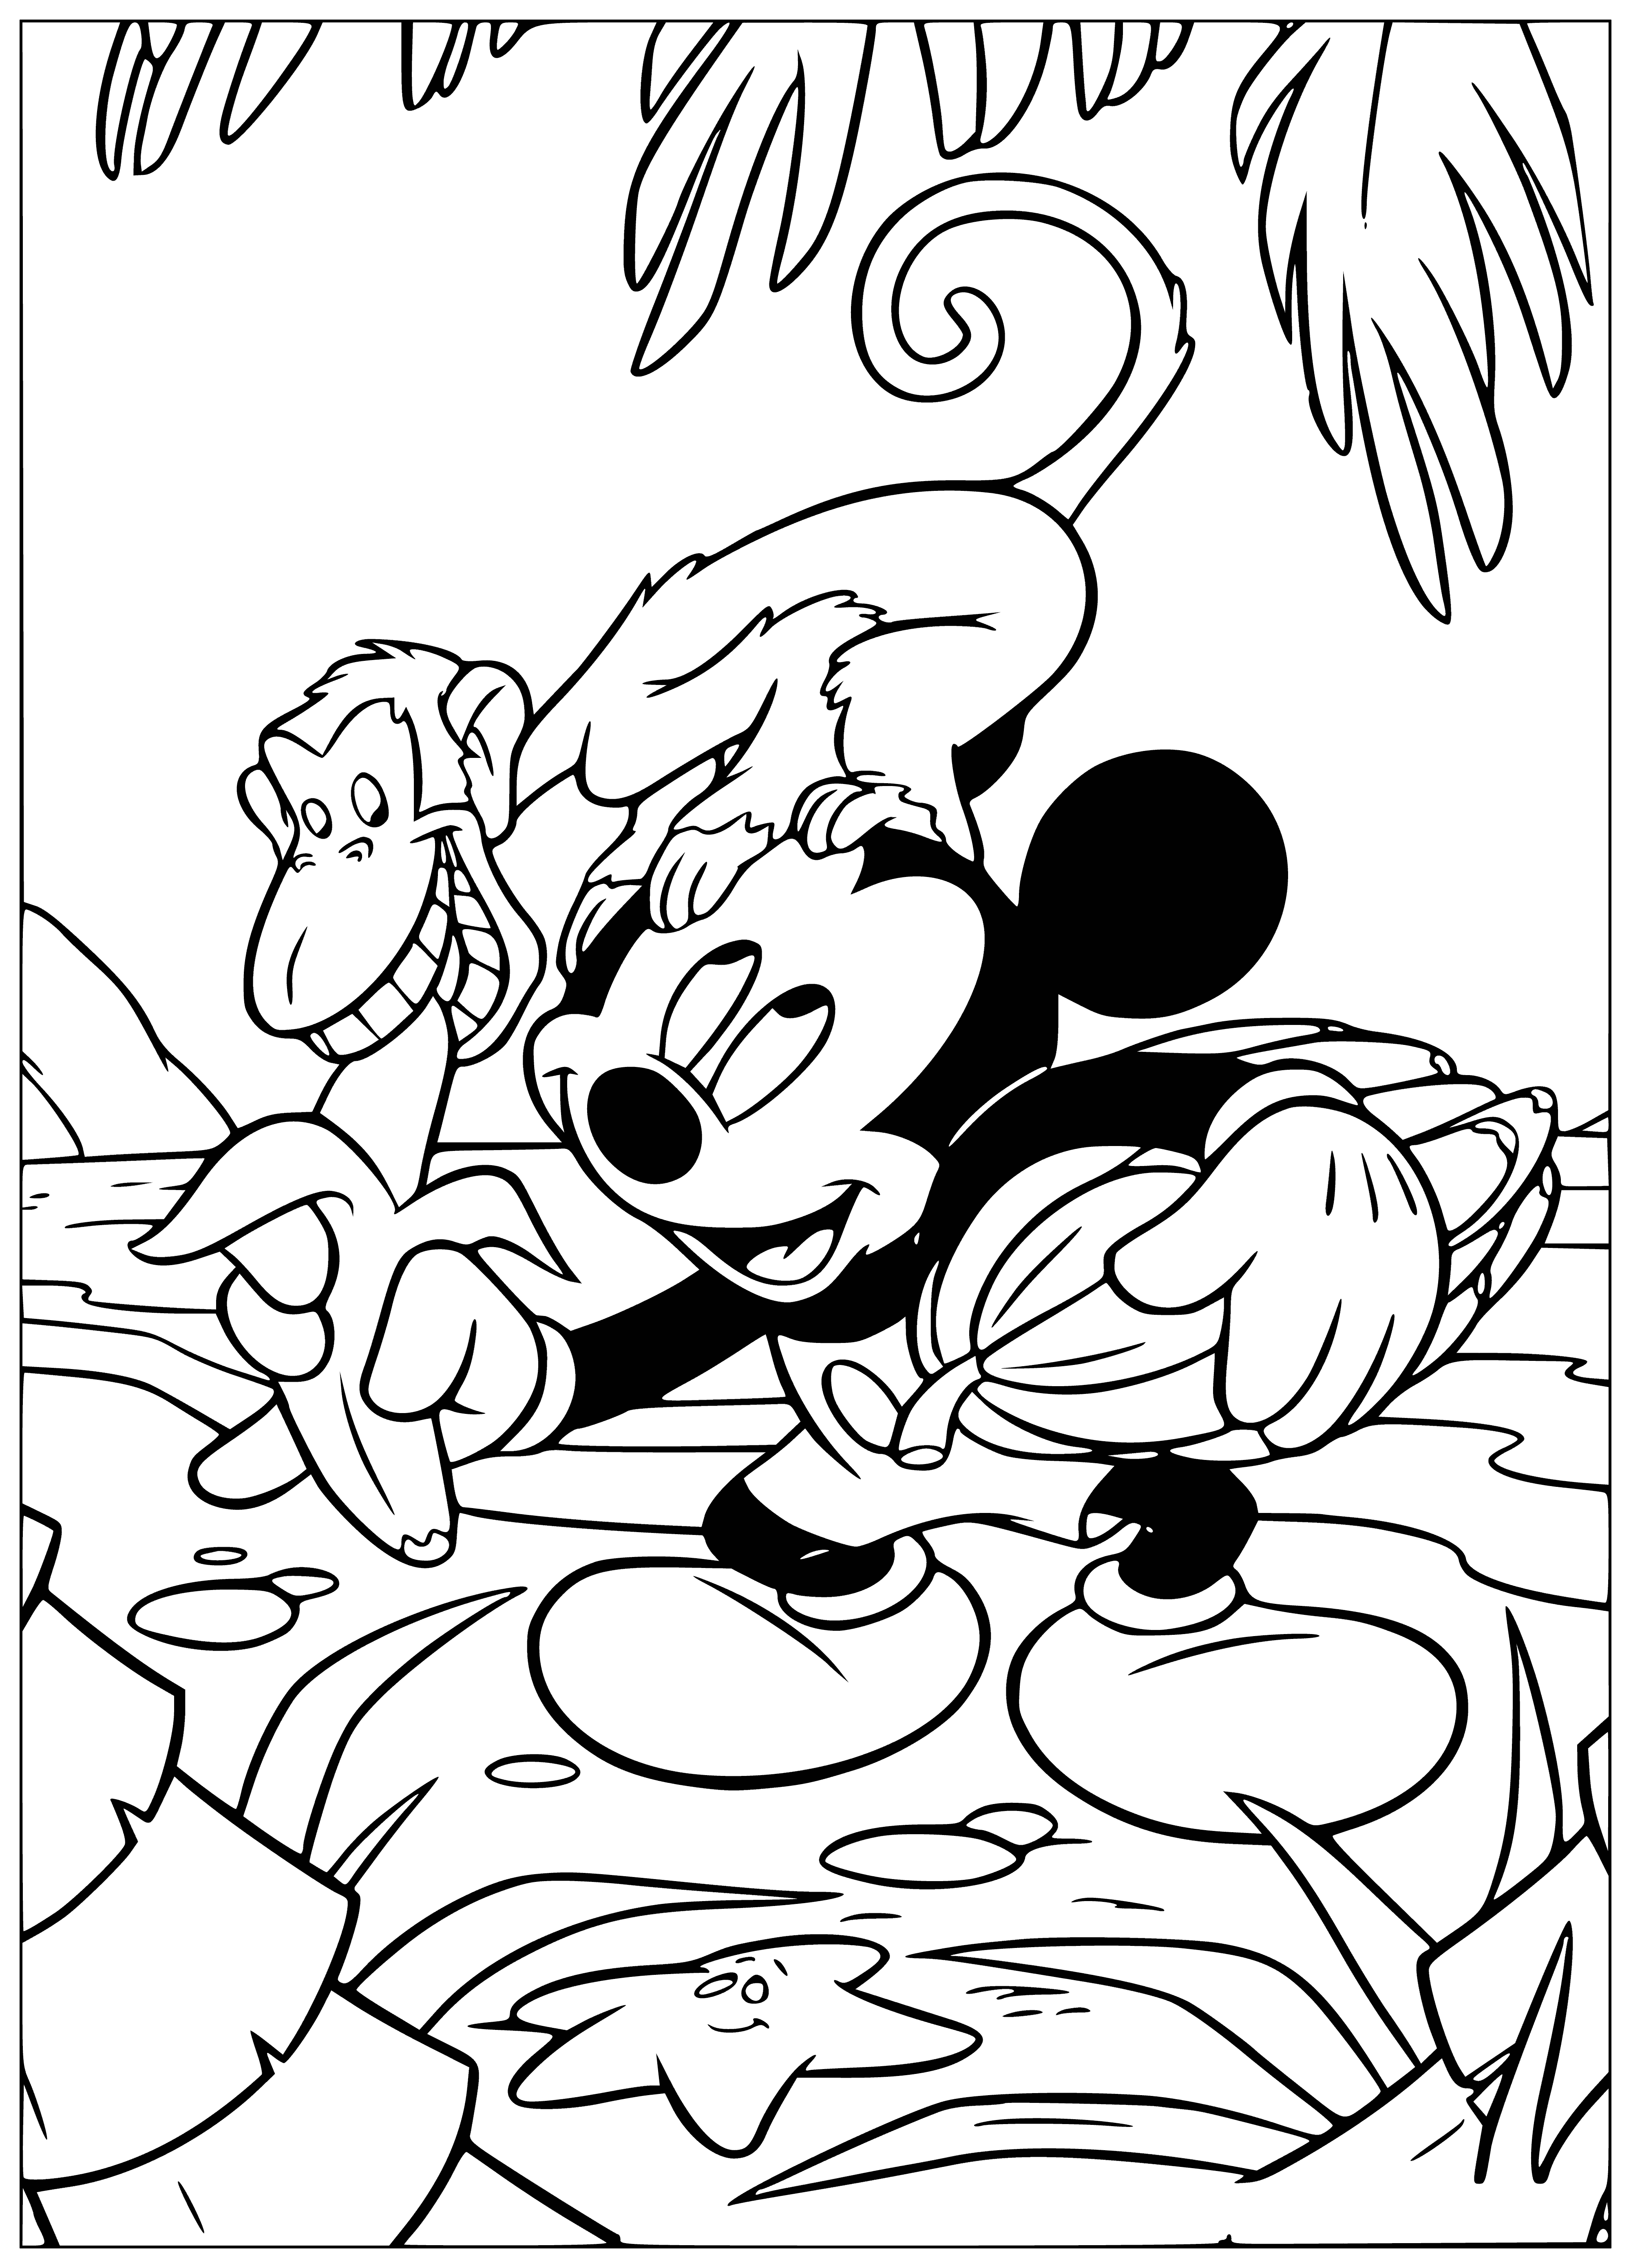 coloring page: Cartoon monkey holds banana, reaches to top of page where "Mickey Mouse & Co" written in black text.